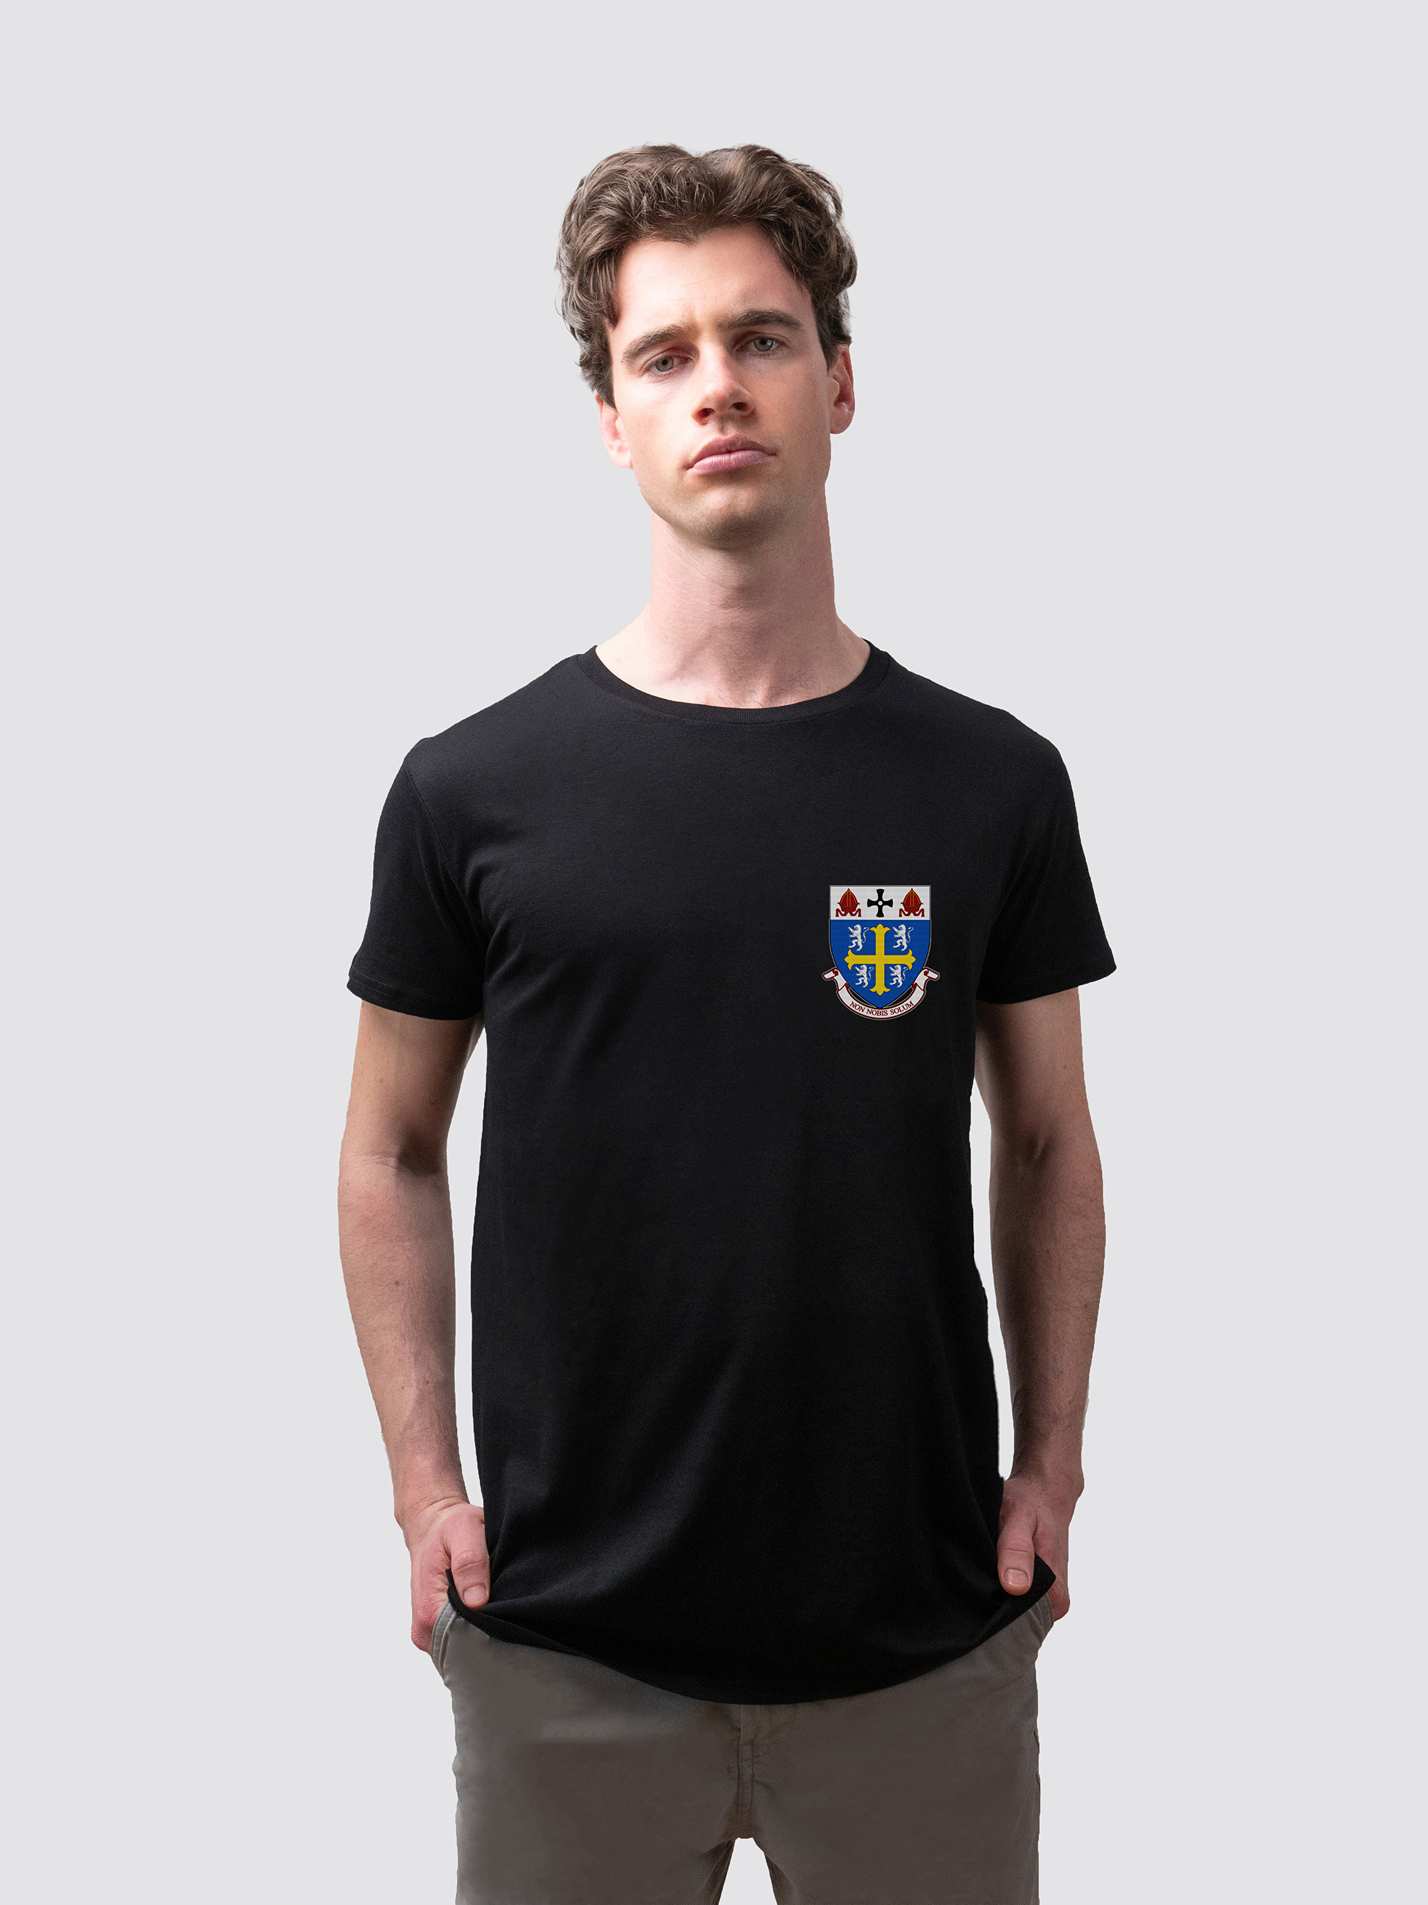 Sustainable University College t-shirt, made from organic cotton